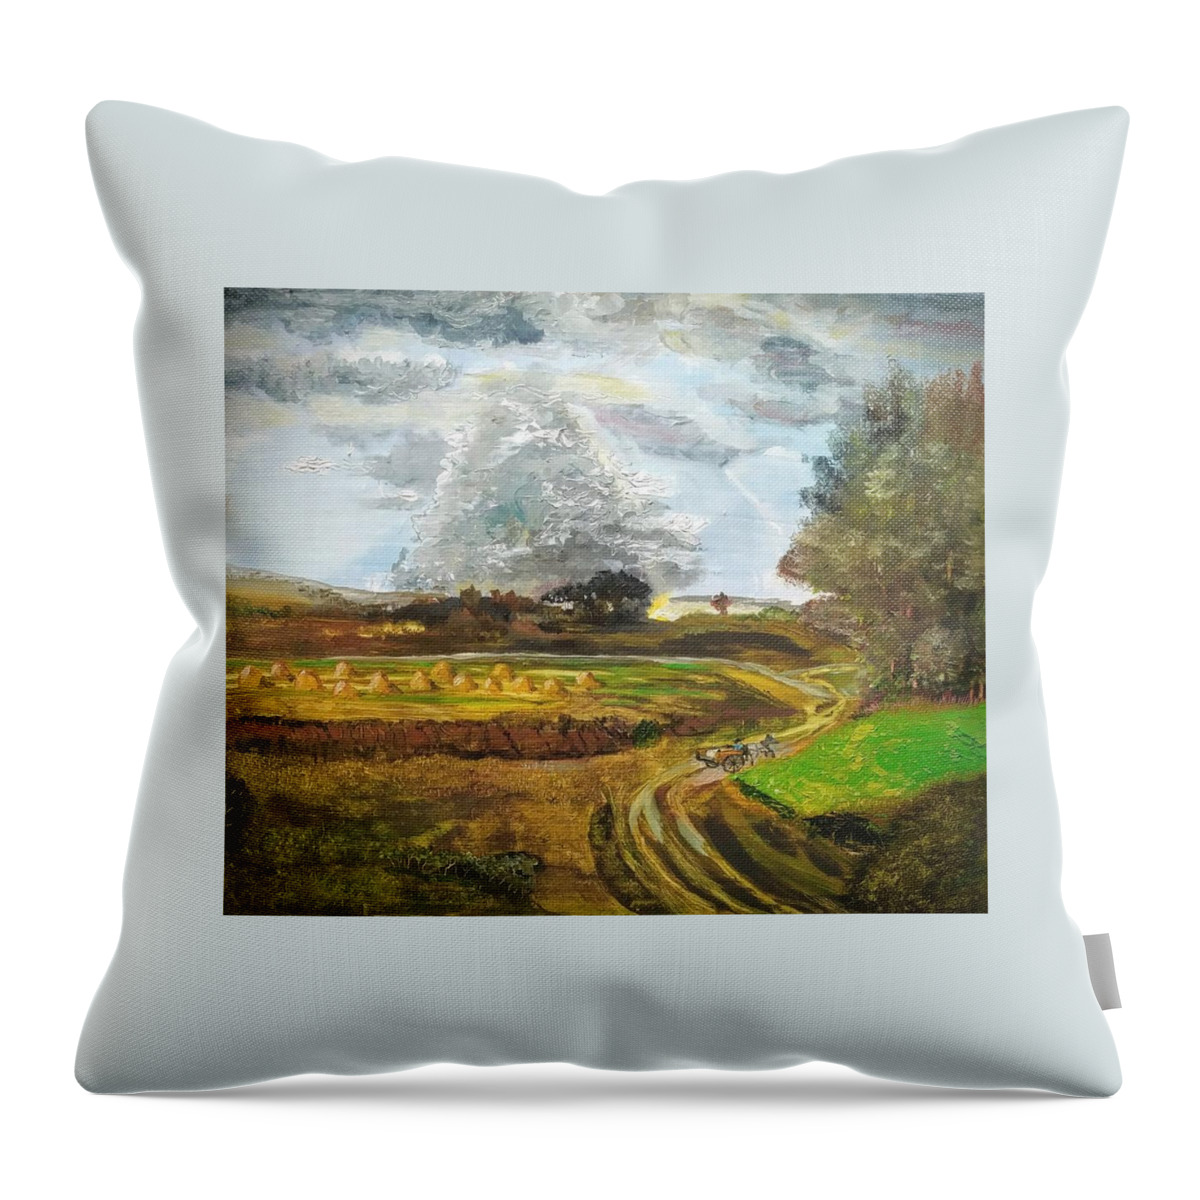 Landscape Throw Pillow featuring the painting Haying Time by Mike Benton